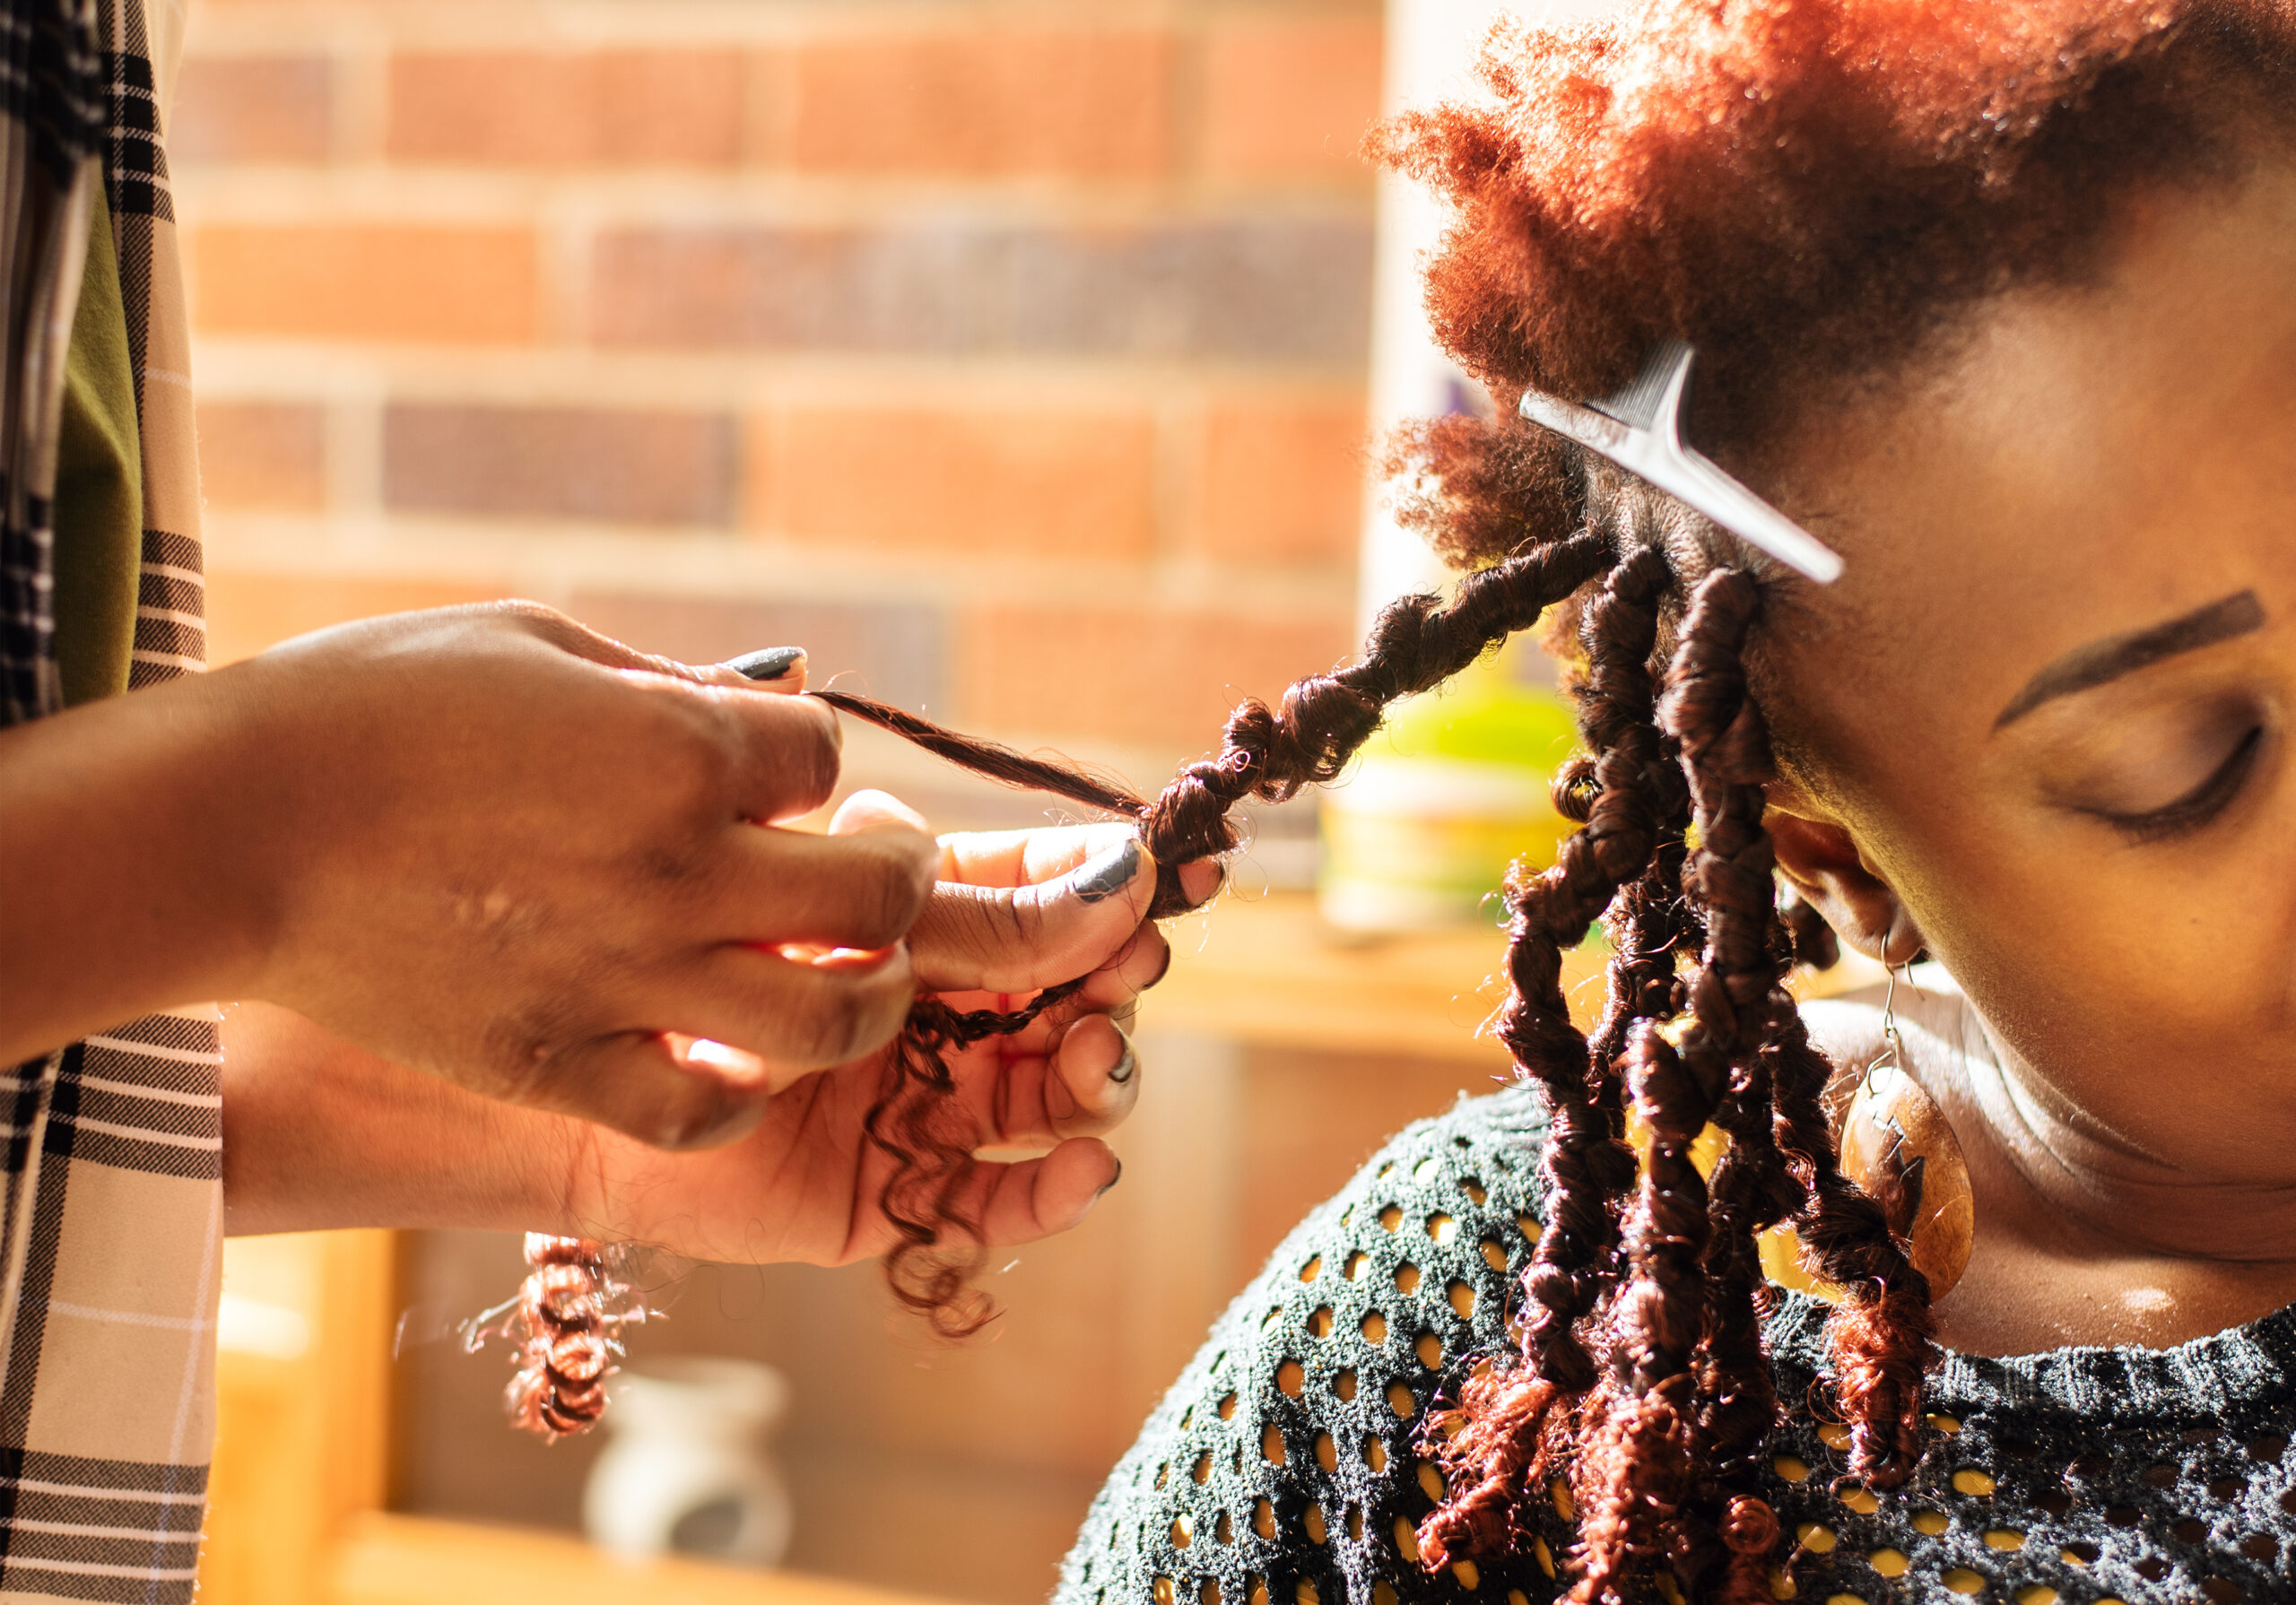 Why Locs Are More Than A Natural Hair Journey